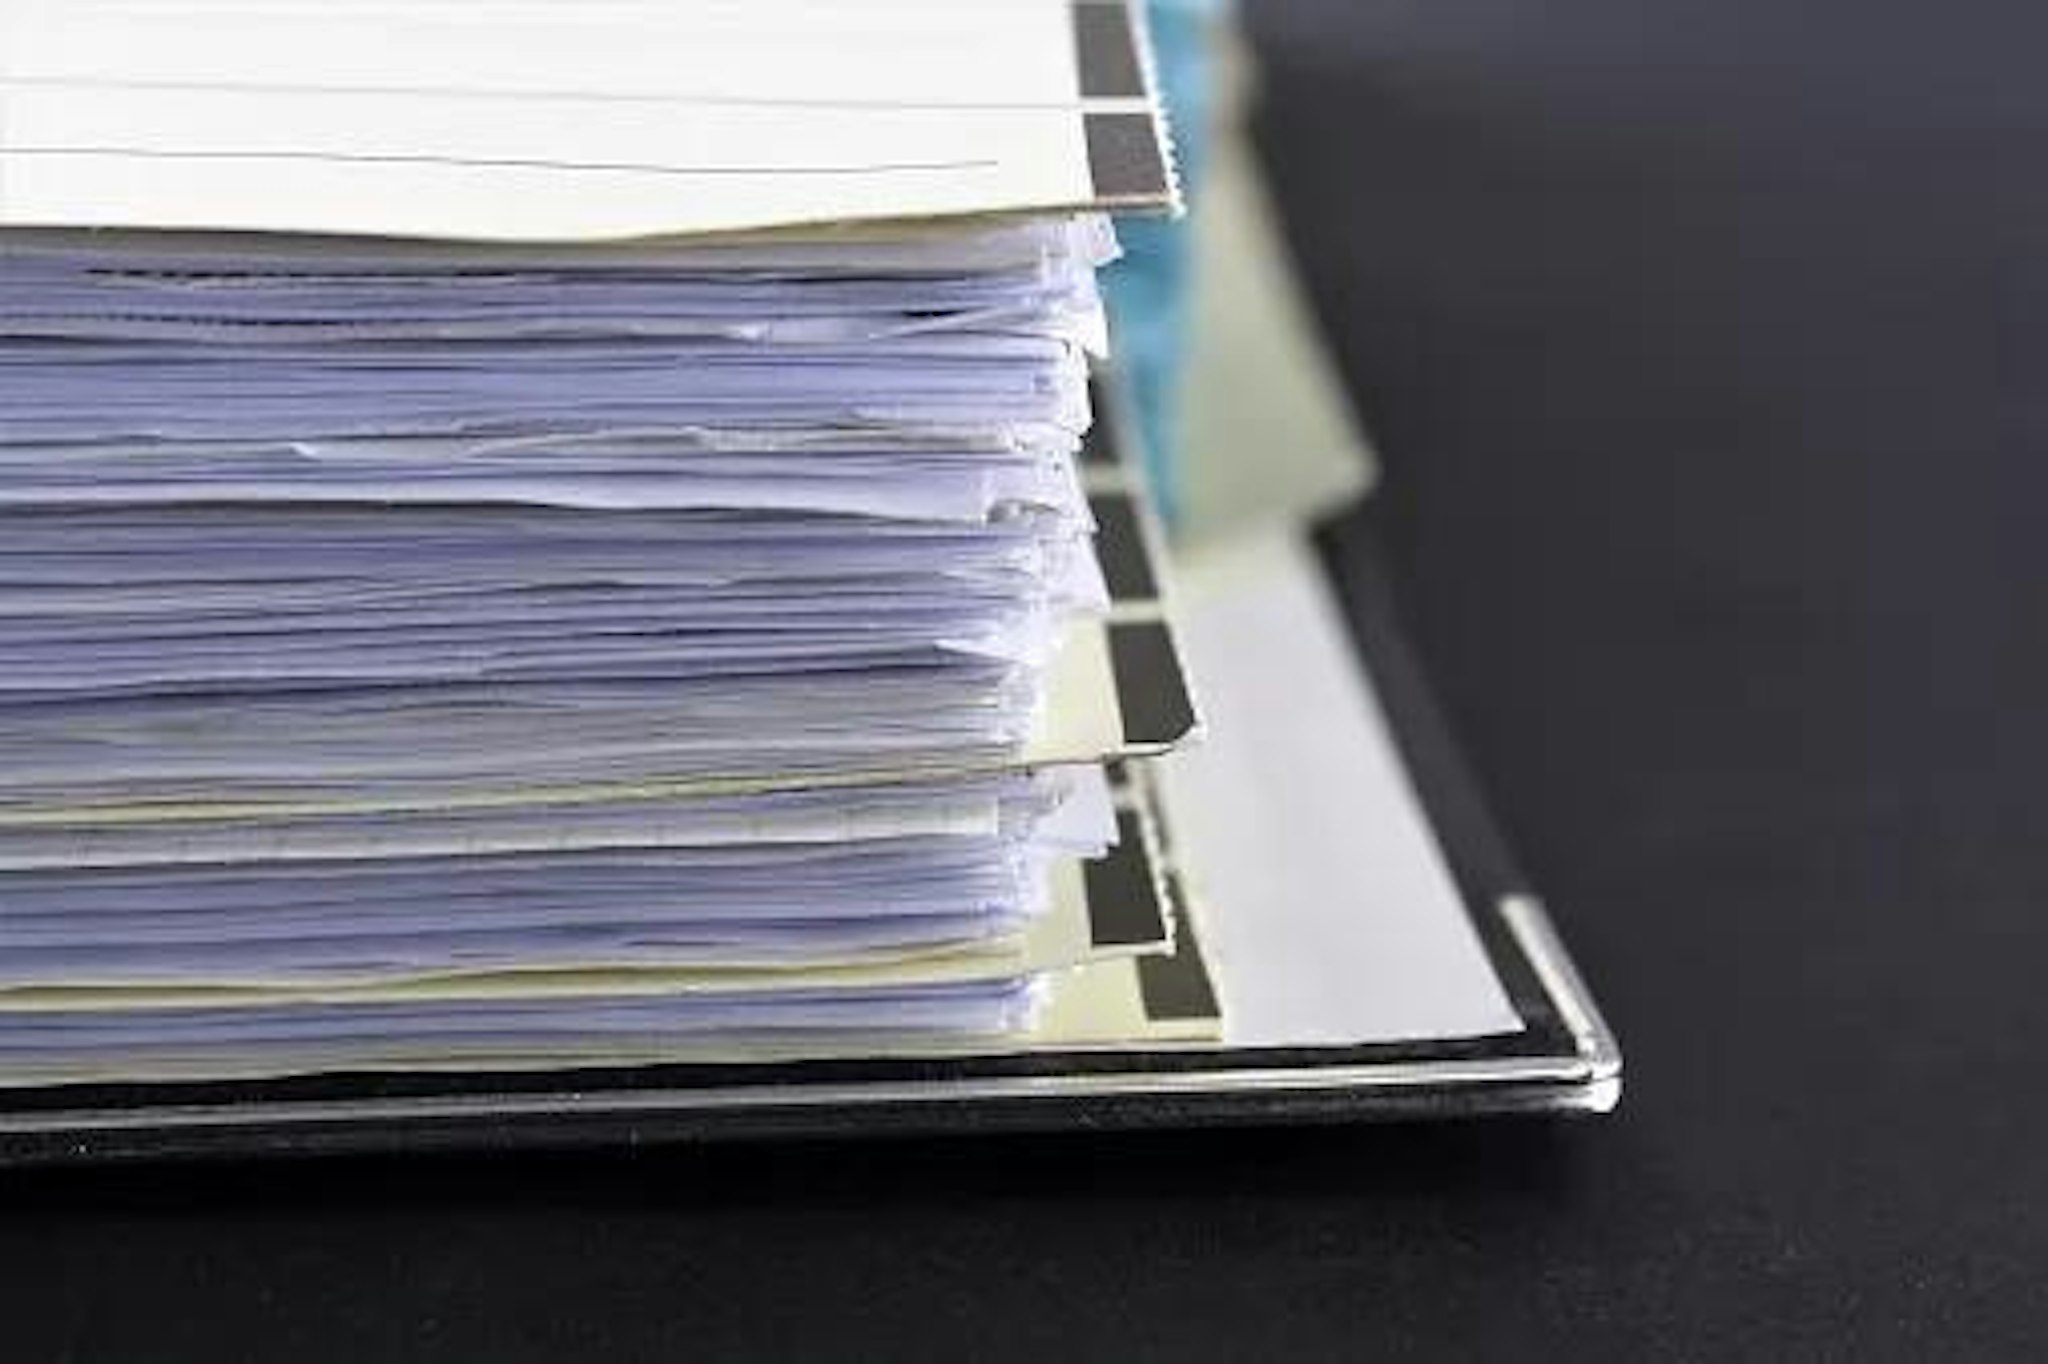 A stack of files signifying the role of the governance department in entity management.